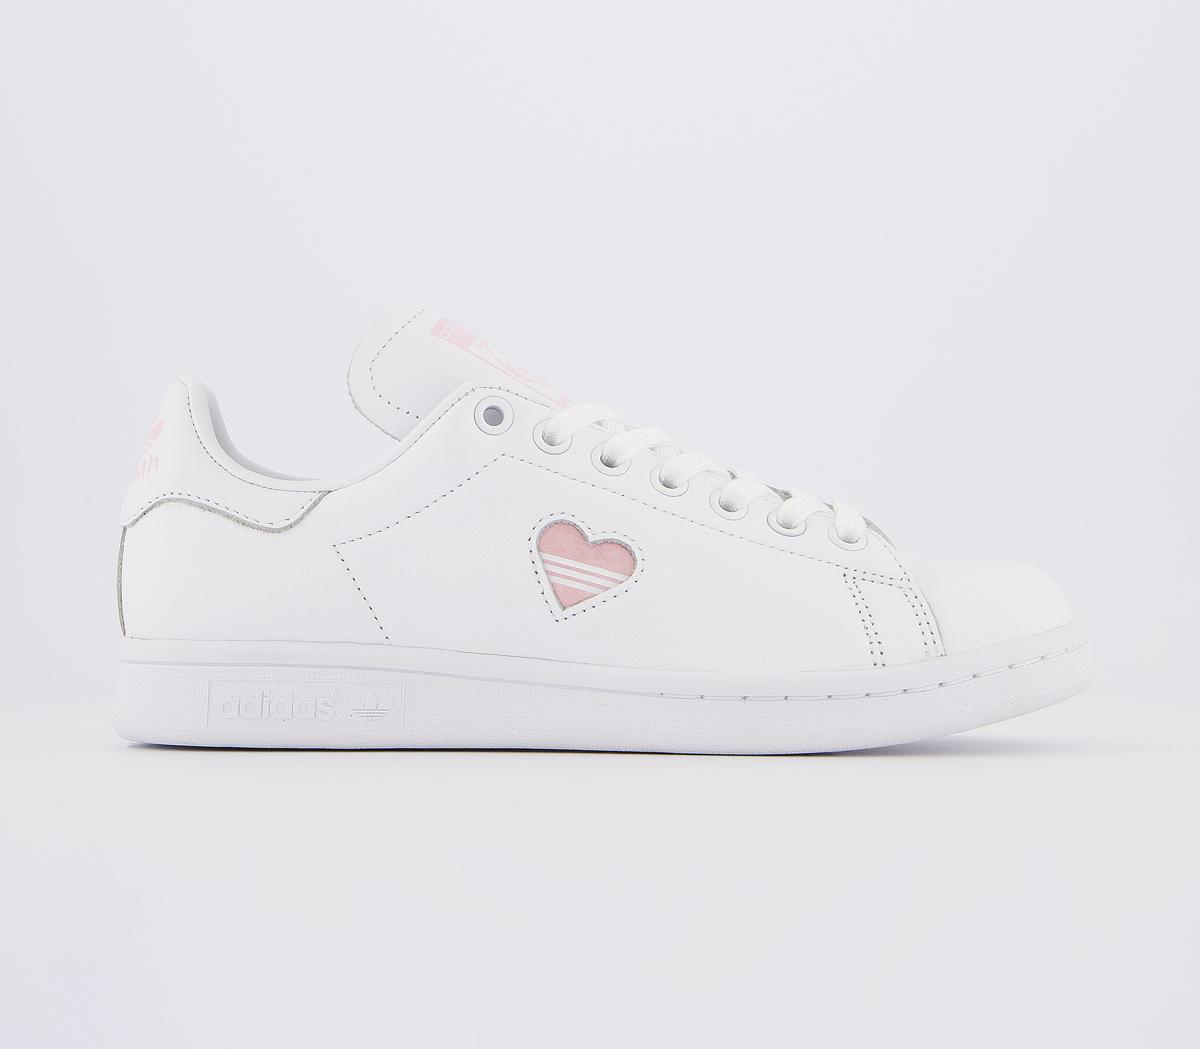 adidasStan Smith TrainersWhite Clear Pink Heart Gold Metallic Exclusive